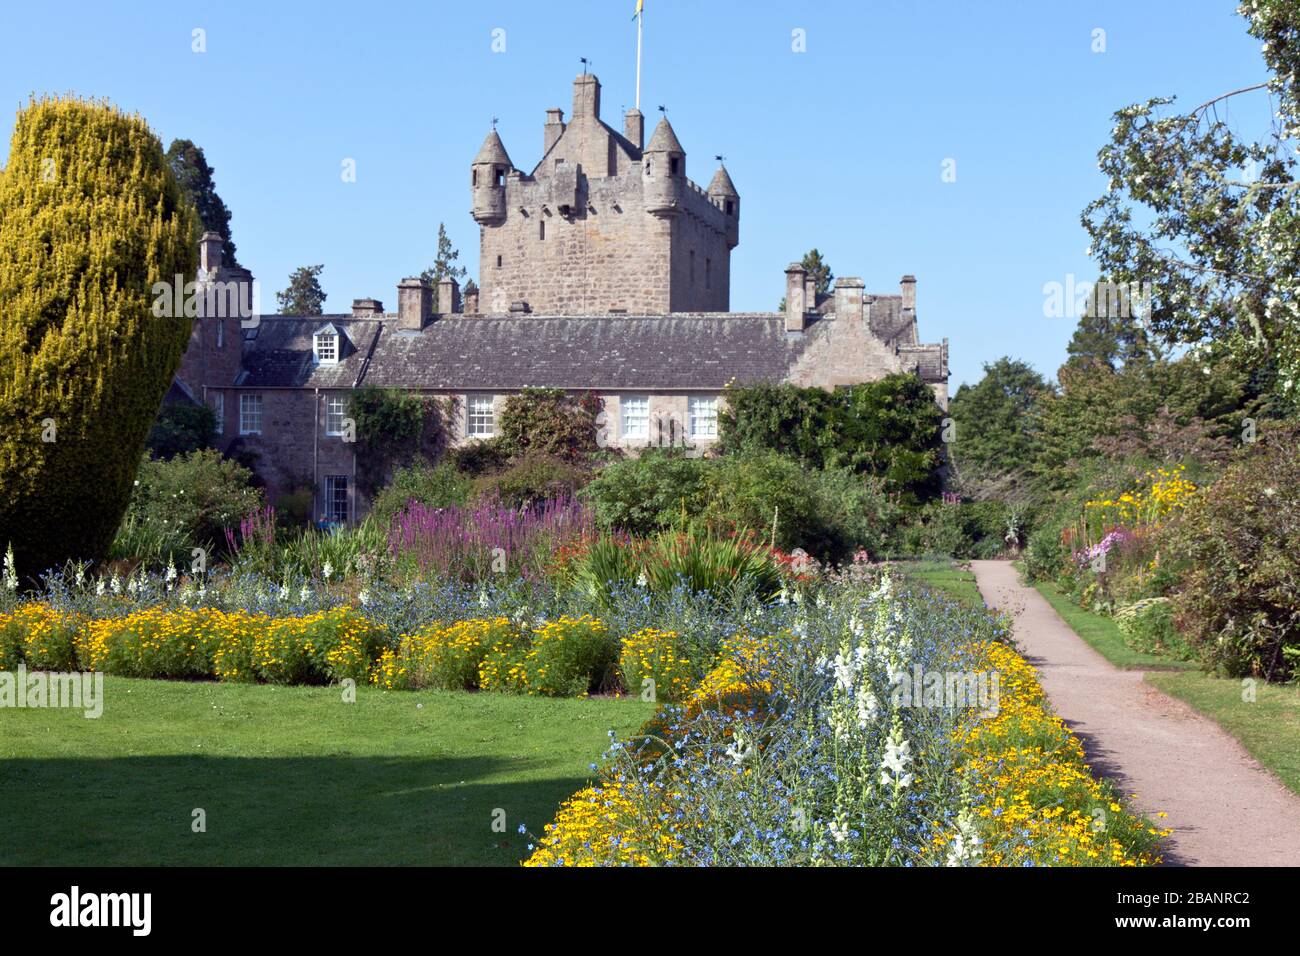 One of four gardens, this aptly-named Flower Garden bathes Cawdor Castle's 15th century tower house in brilliant color.  Owned and inhabited by the sa Stock Photo